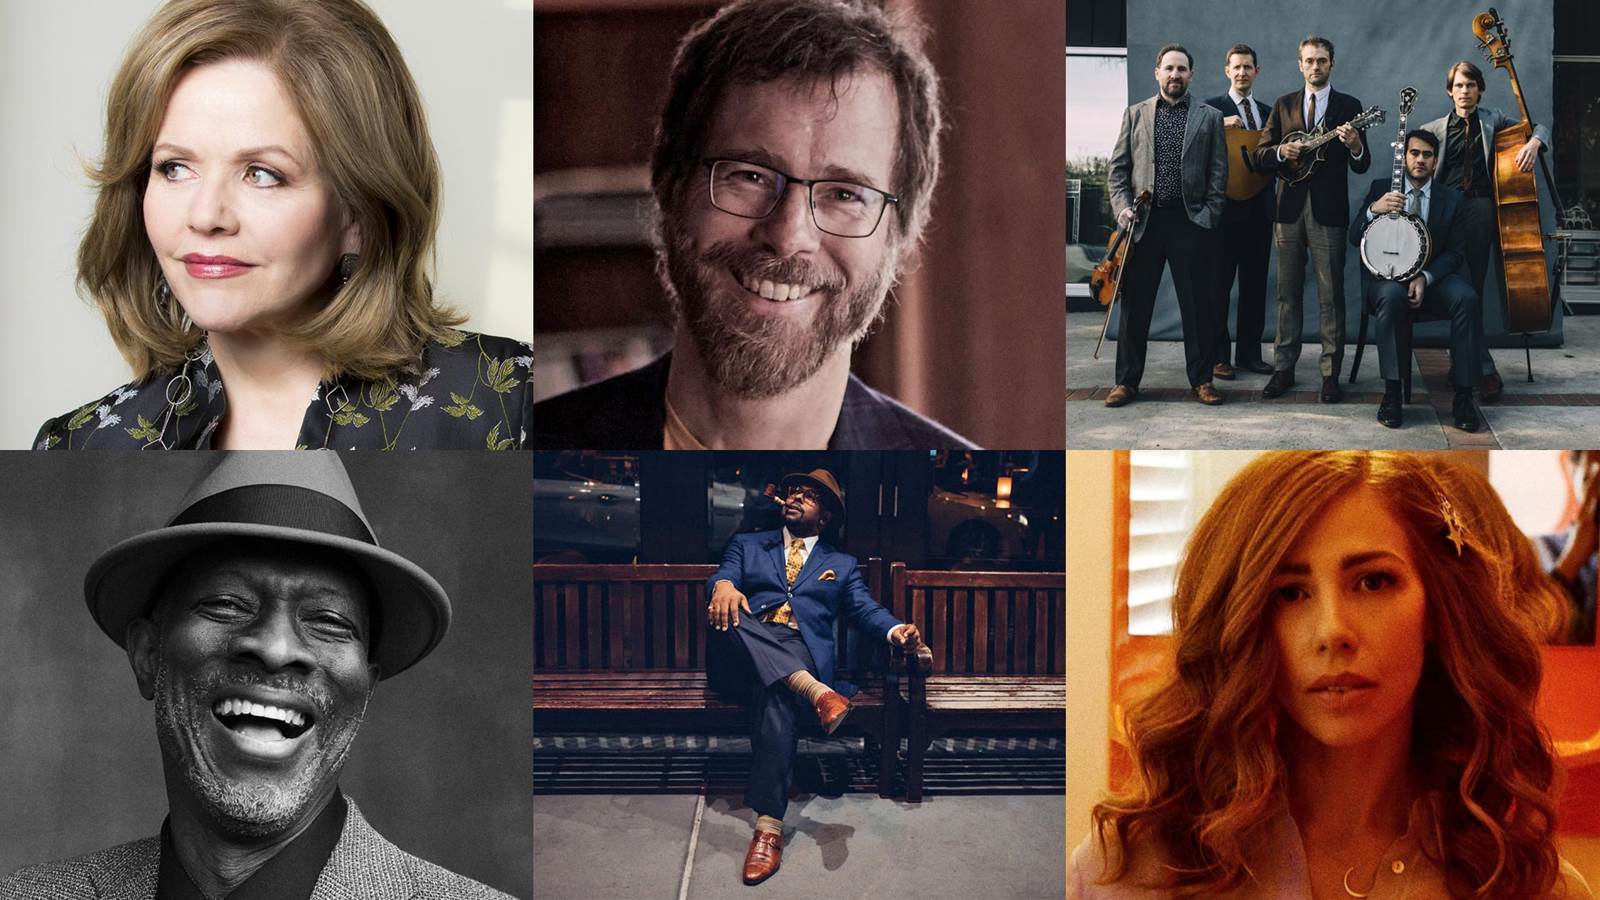 Montage of photos of artists Renee Fleming, Ben Folds, , Punch Brothers, Keb’ Mo’, Christian McBride, and Rachael Price